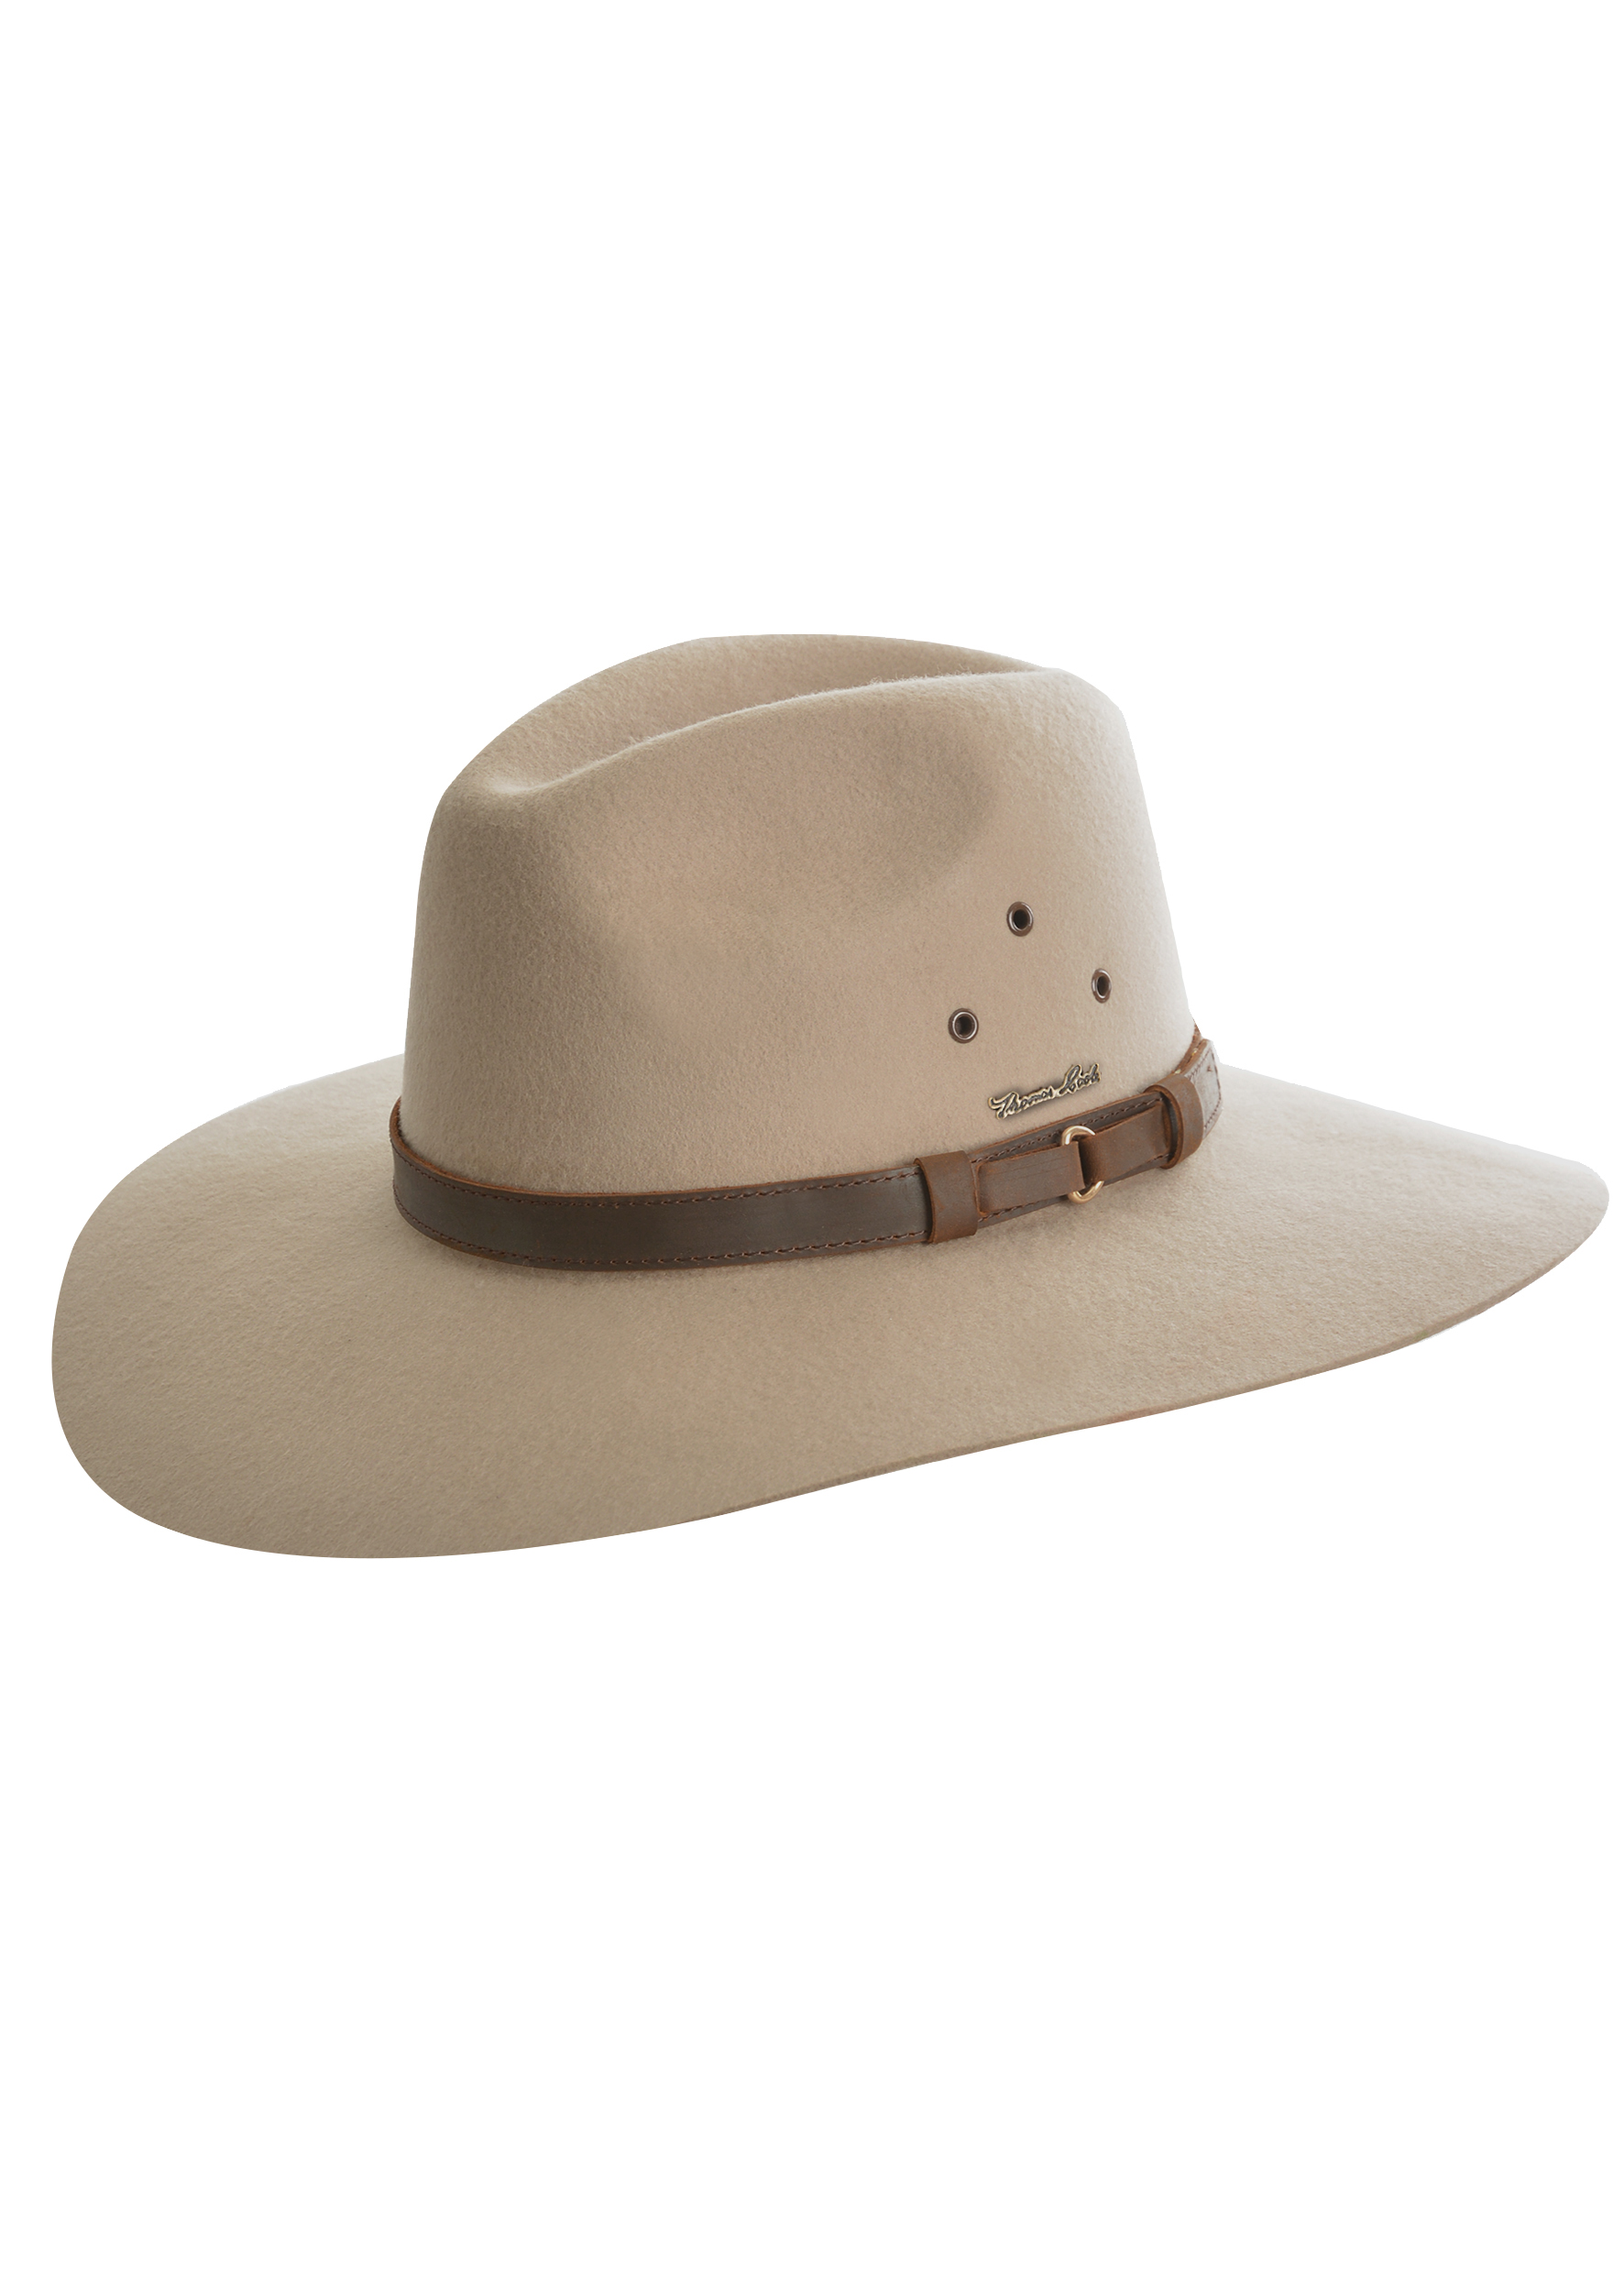 TCP1935002 Thomas Cook Highlands Hat